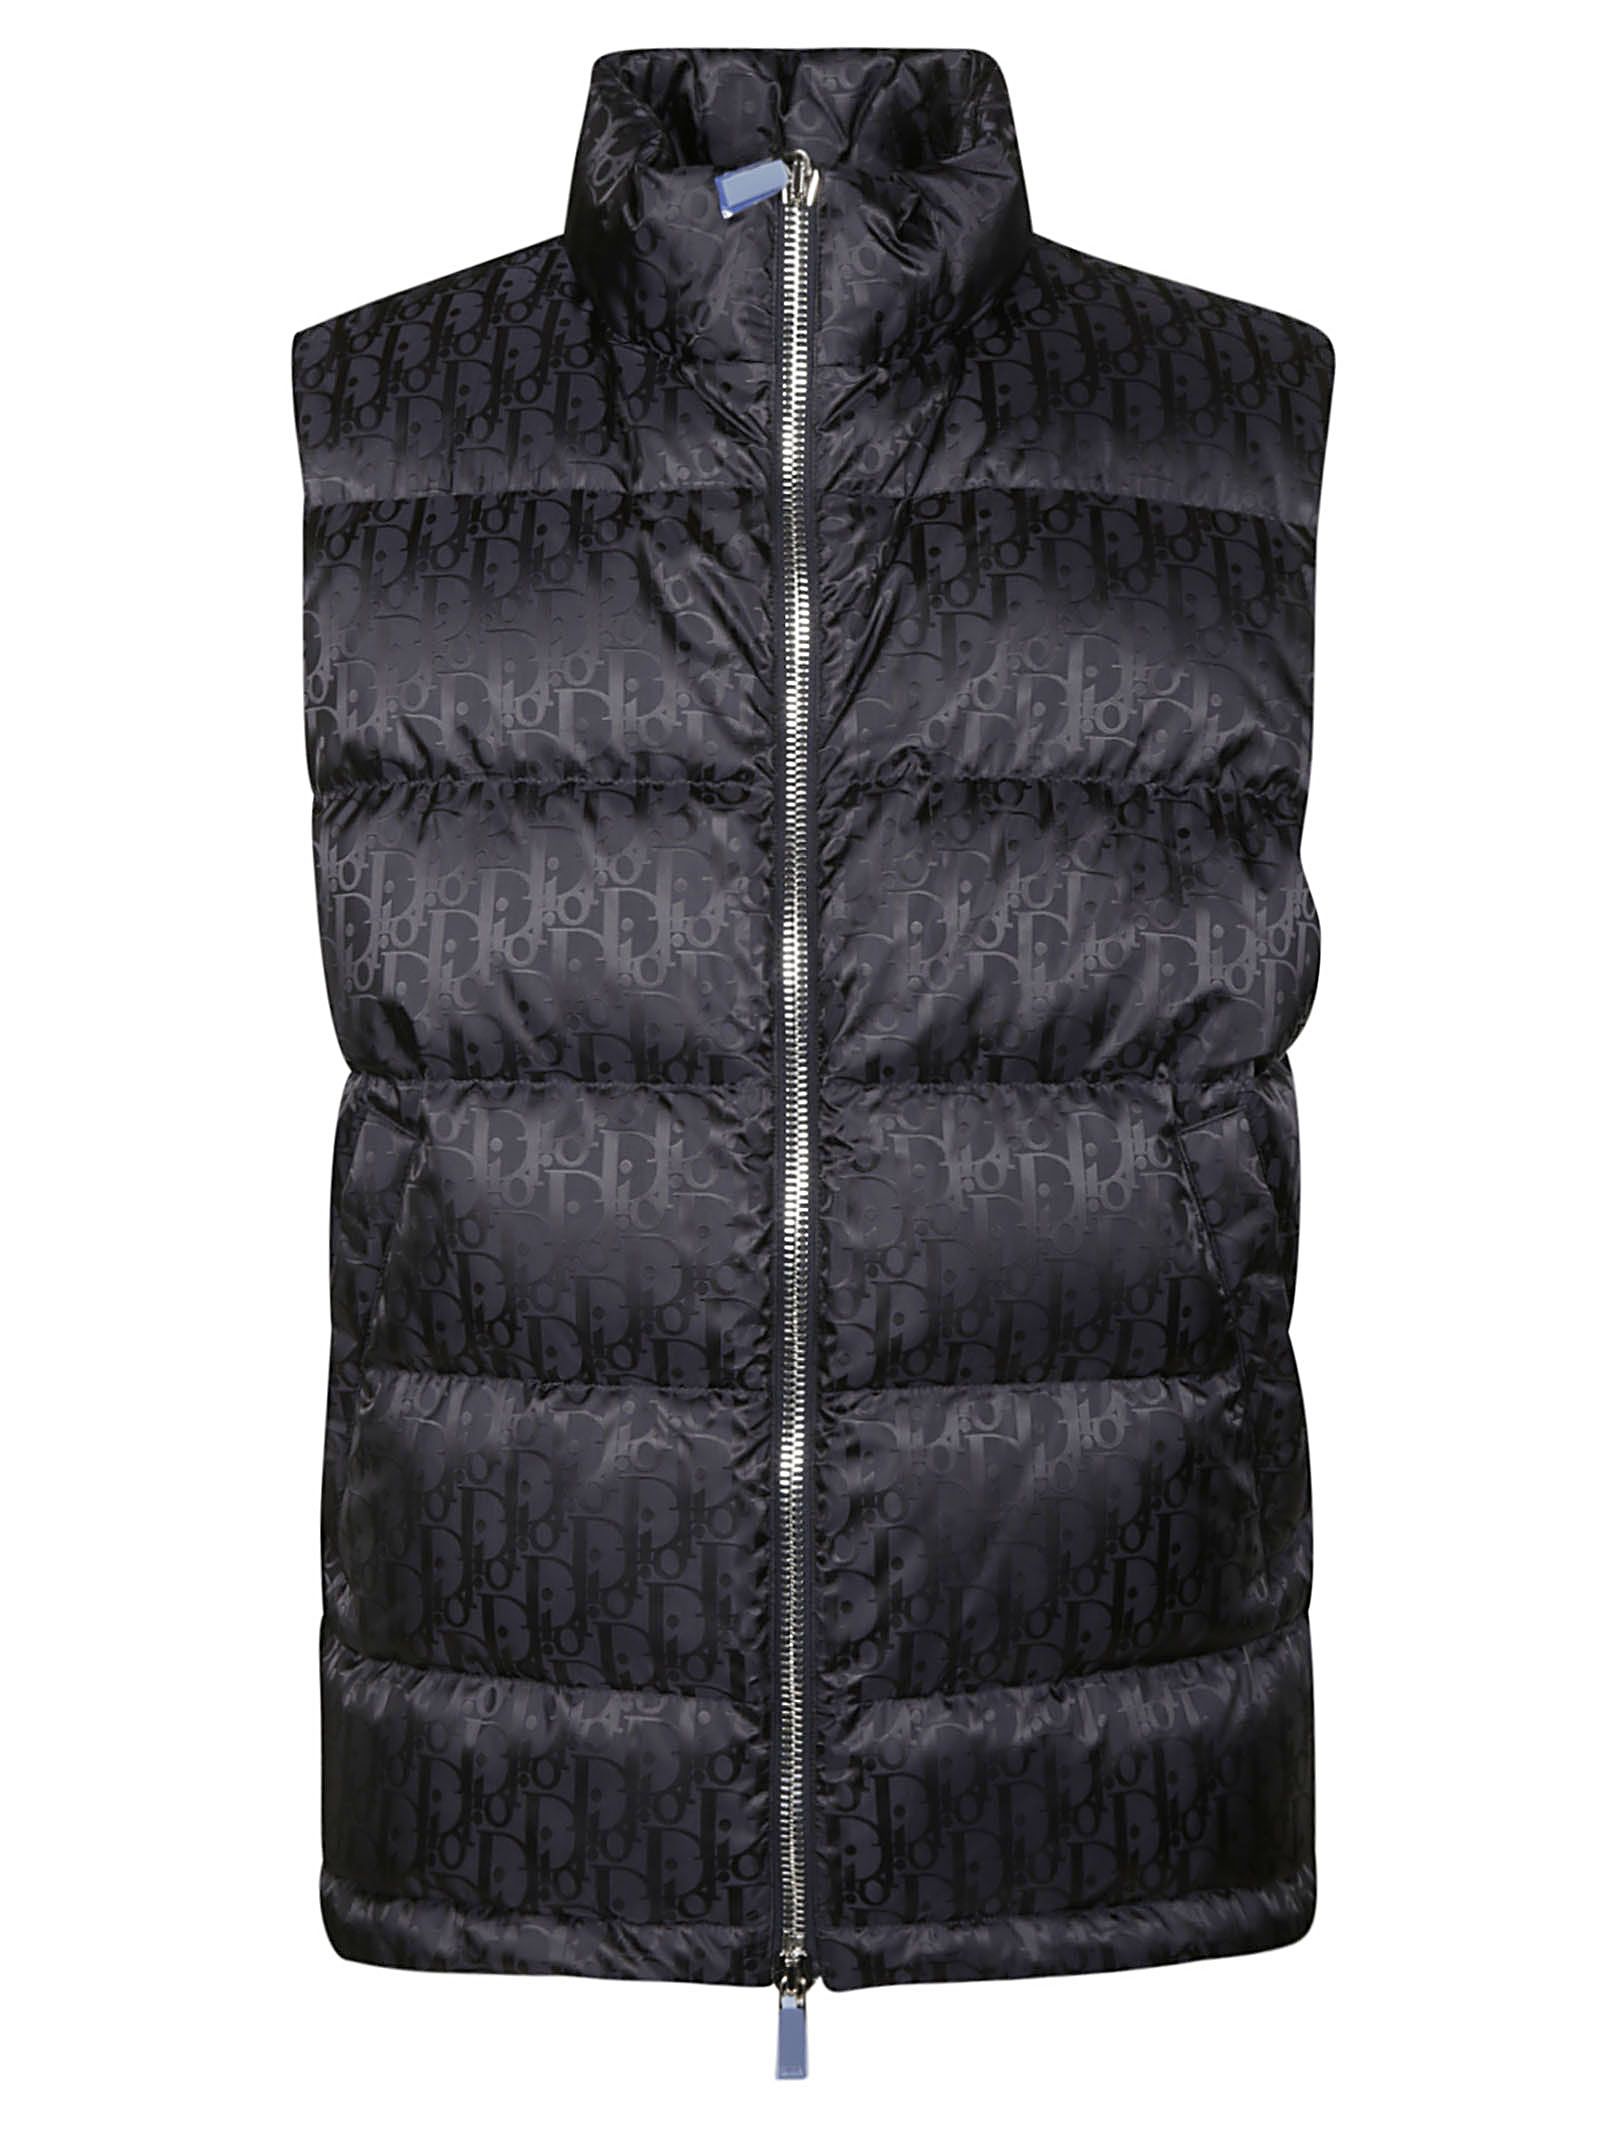 Christian Dior Vests | italist, ALWAYS LIKE A SALE